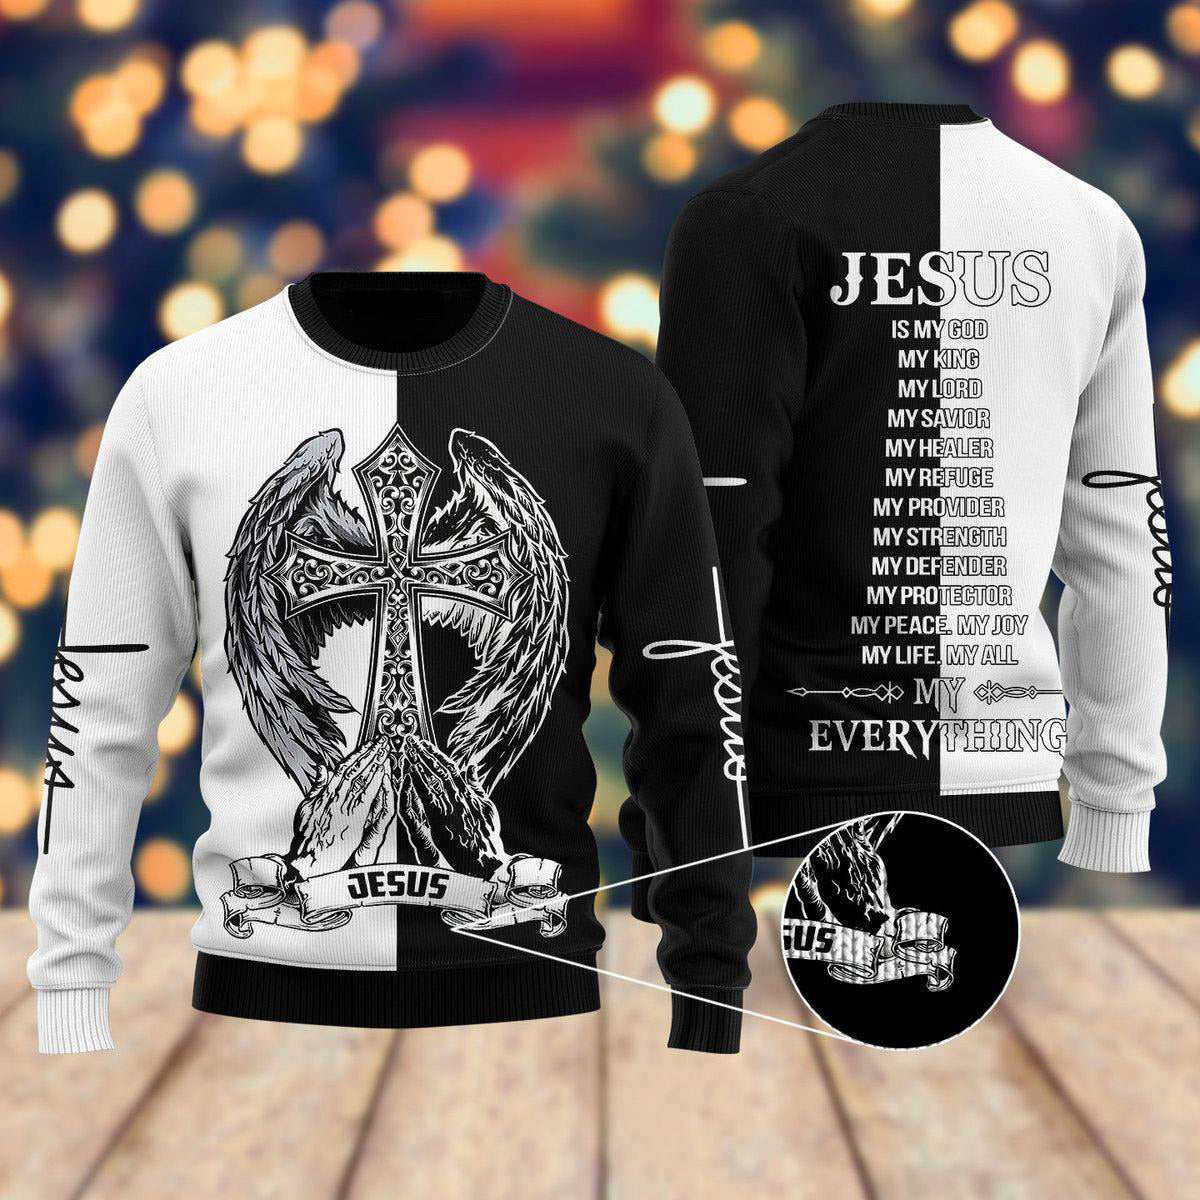 Jesus Easter Ugly Christmas Sweater For Men & Women - Jesus Christ Sweater - Christian Shirts Gifts Idea